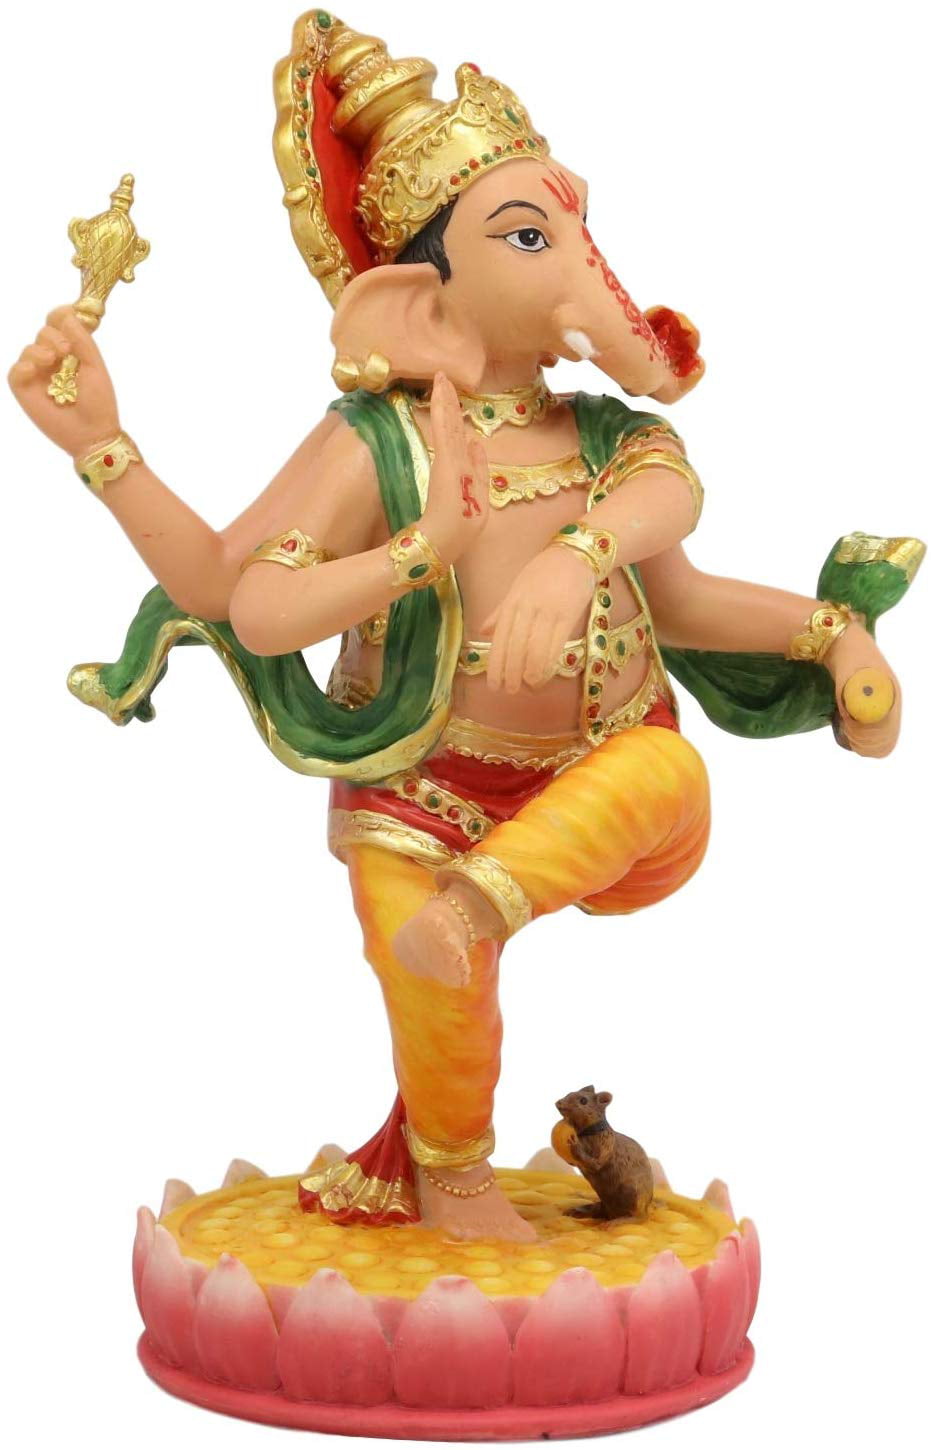 Buy Collectible India Dancing Ganesha Idol - Sculpture - Ganesh Statue -  Ganpati Murti Decor Gifts Online at Low Prices in India - Amazon.in